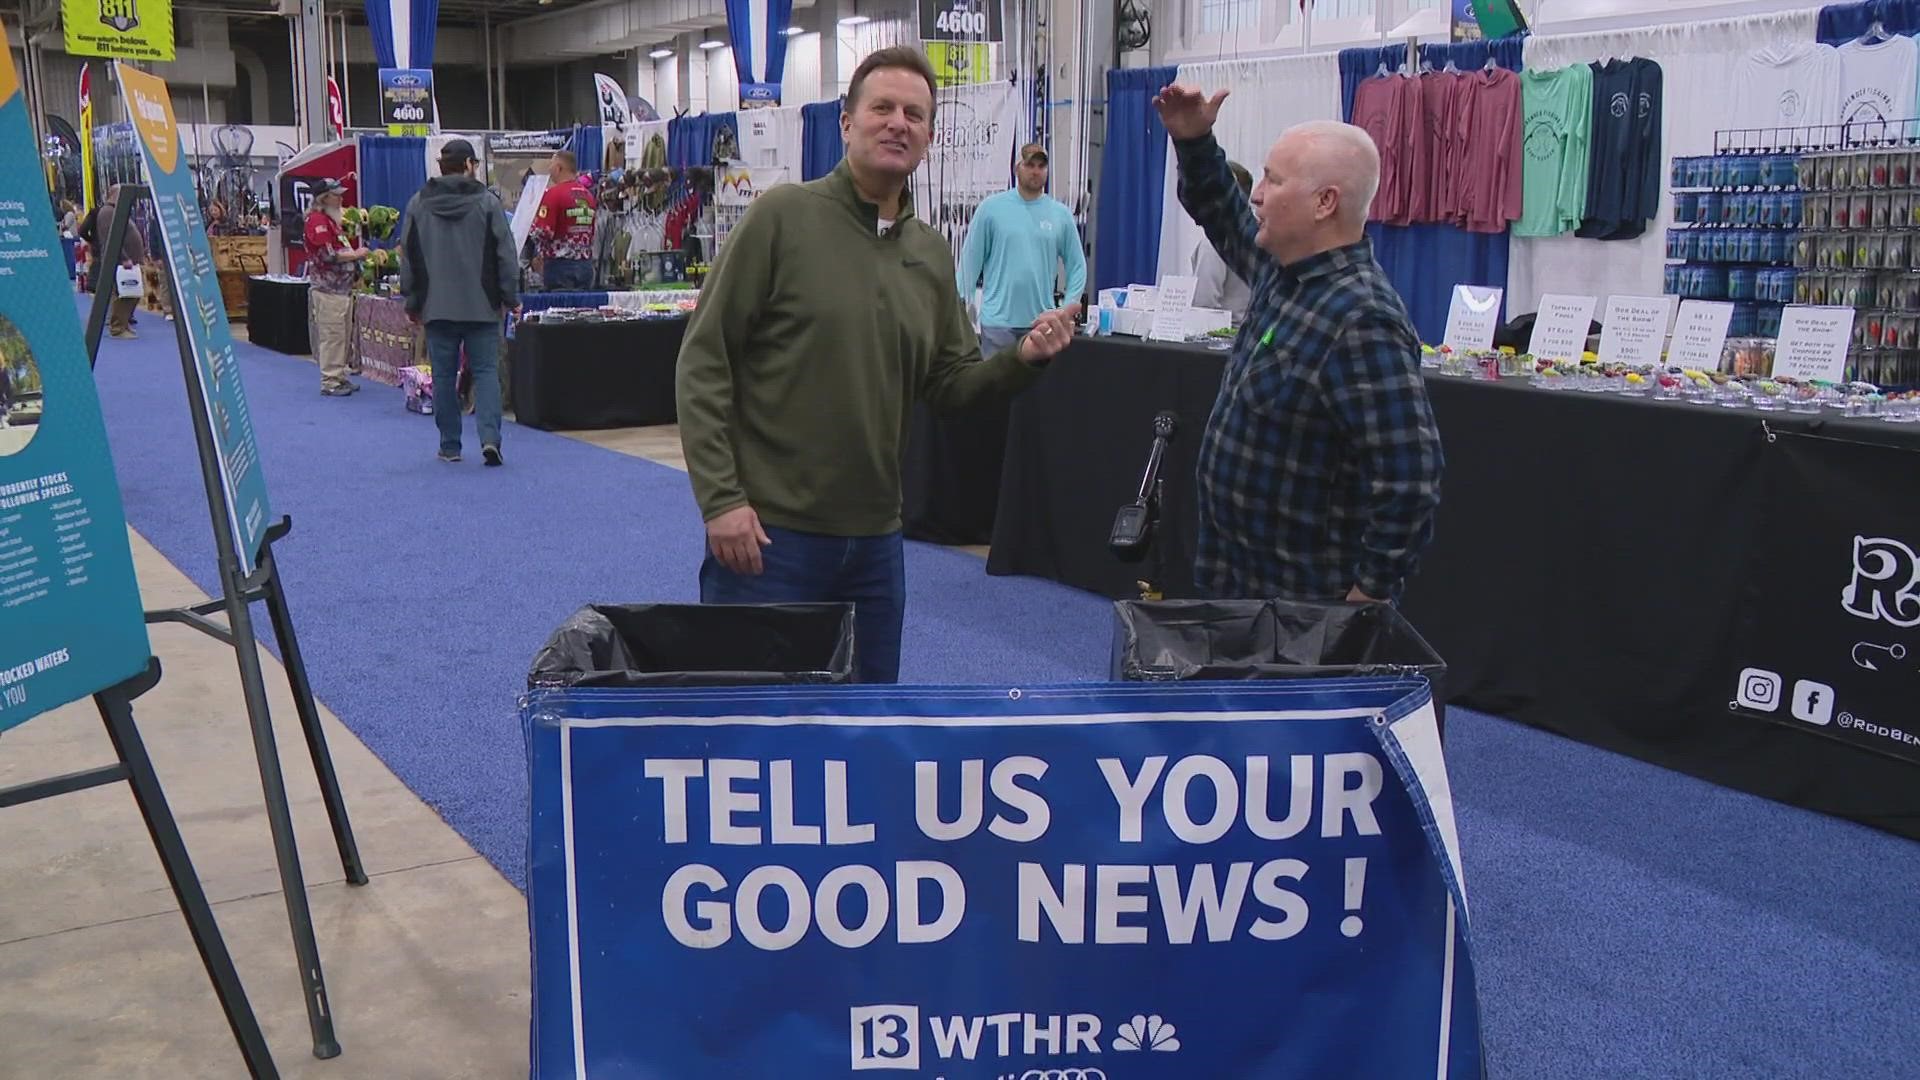 Dave Calabro made his way to the Indiana State Fairgrounds this week, visiting with folks looking forward to enjoying some outdoor activities.